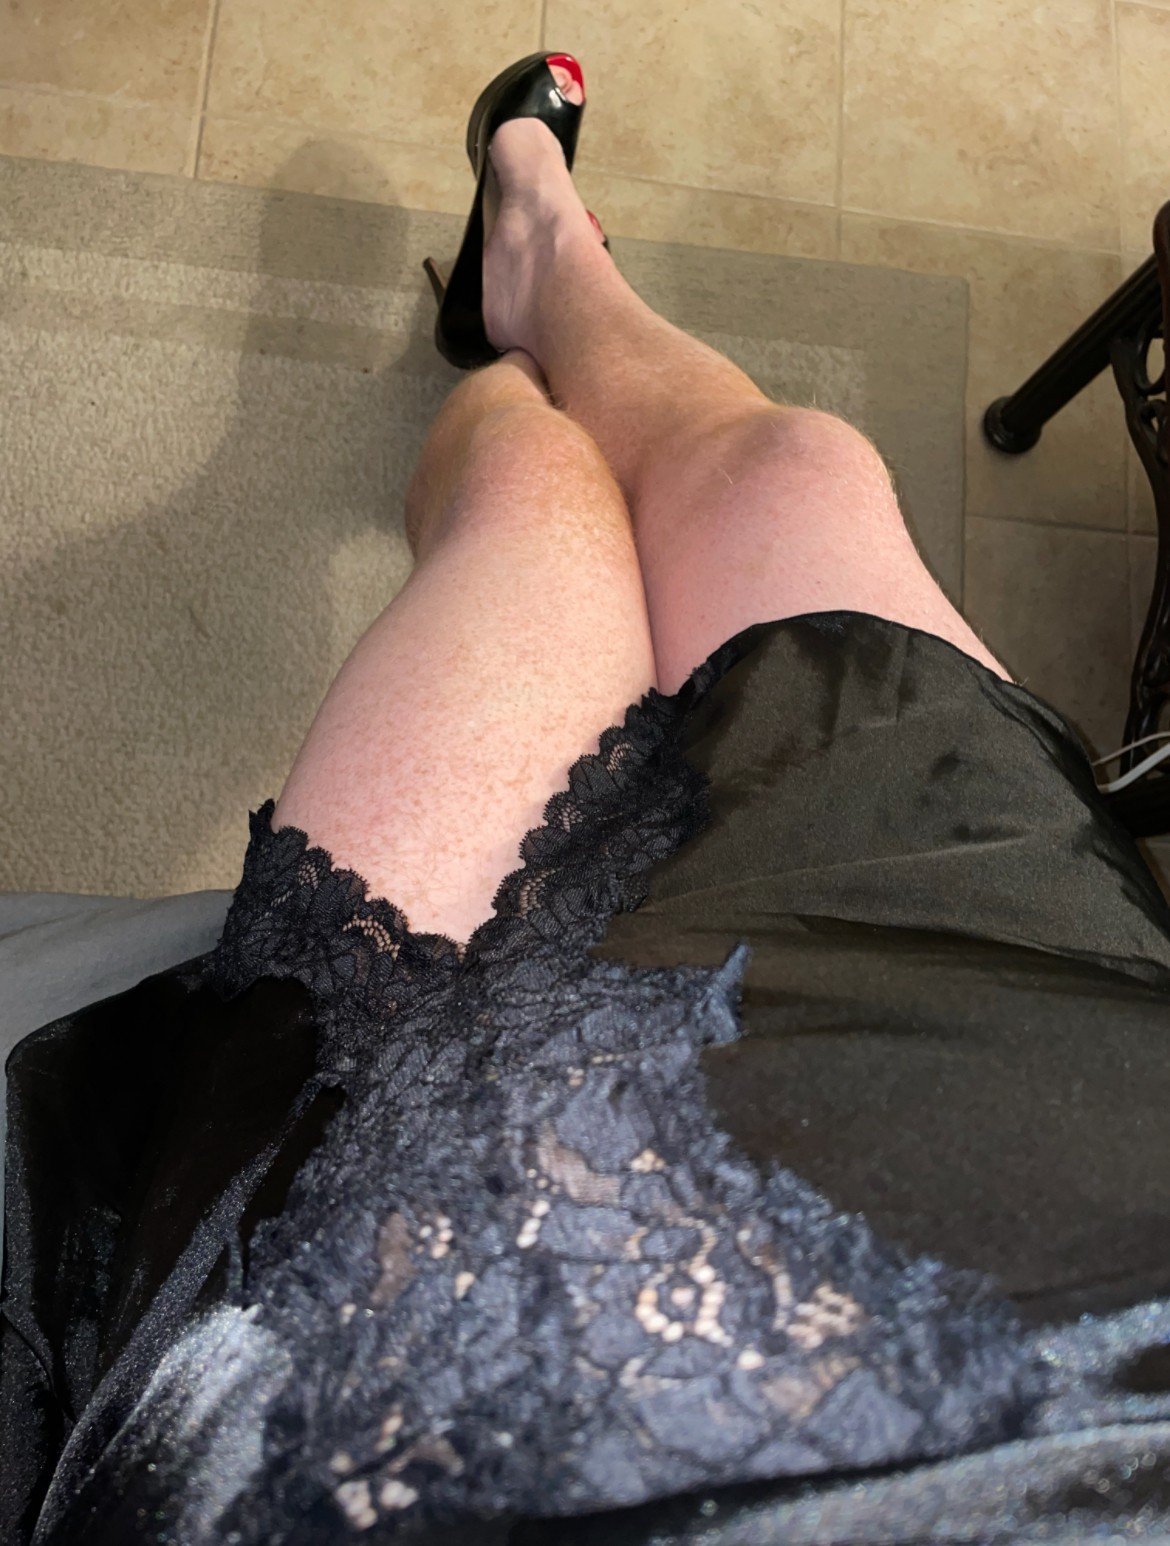 Watch the Photo by Lingerie lover with the username @Camokuntry81, posted on November 18, 2023. The post is about the topic Crossdressers. and the text says 'just having a little naughty time 😈'